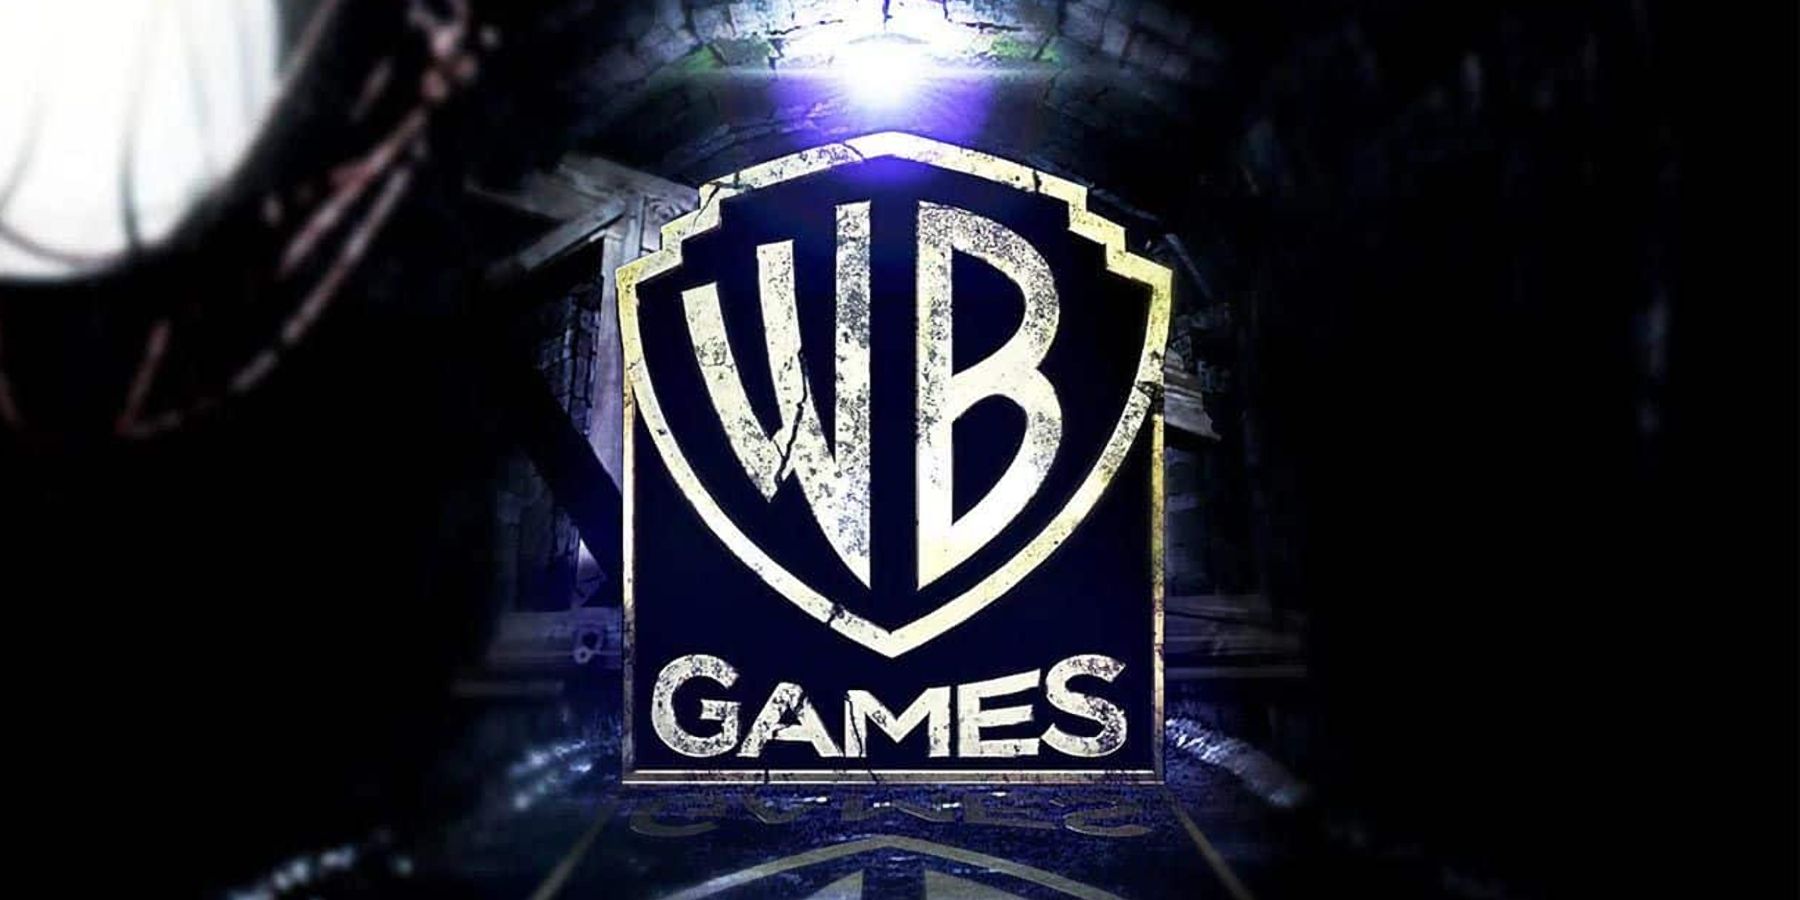 Warner Bros.: Single Player Games Are Still Important